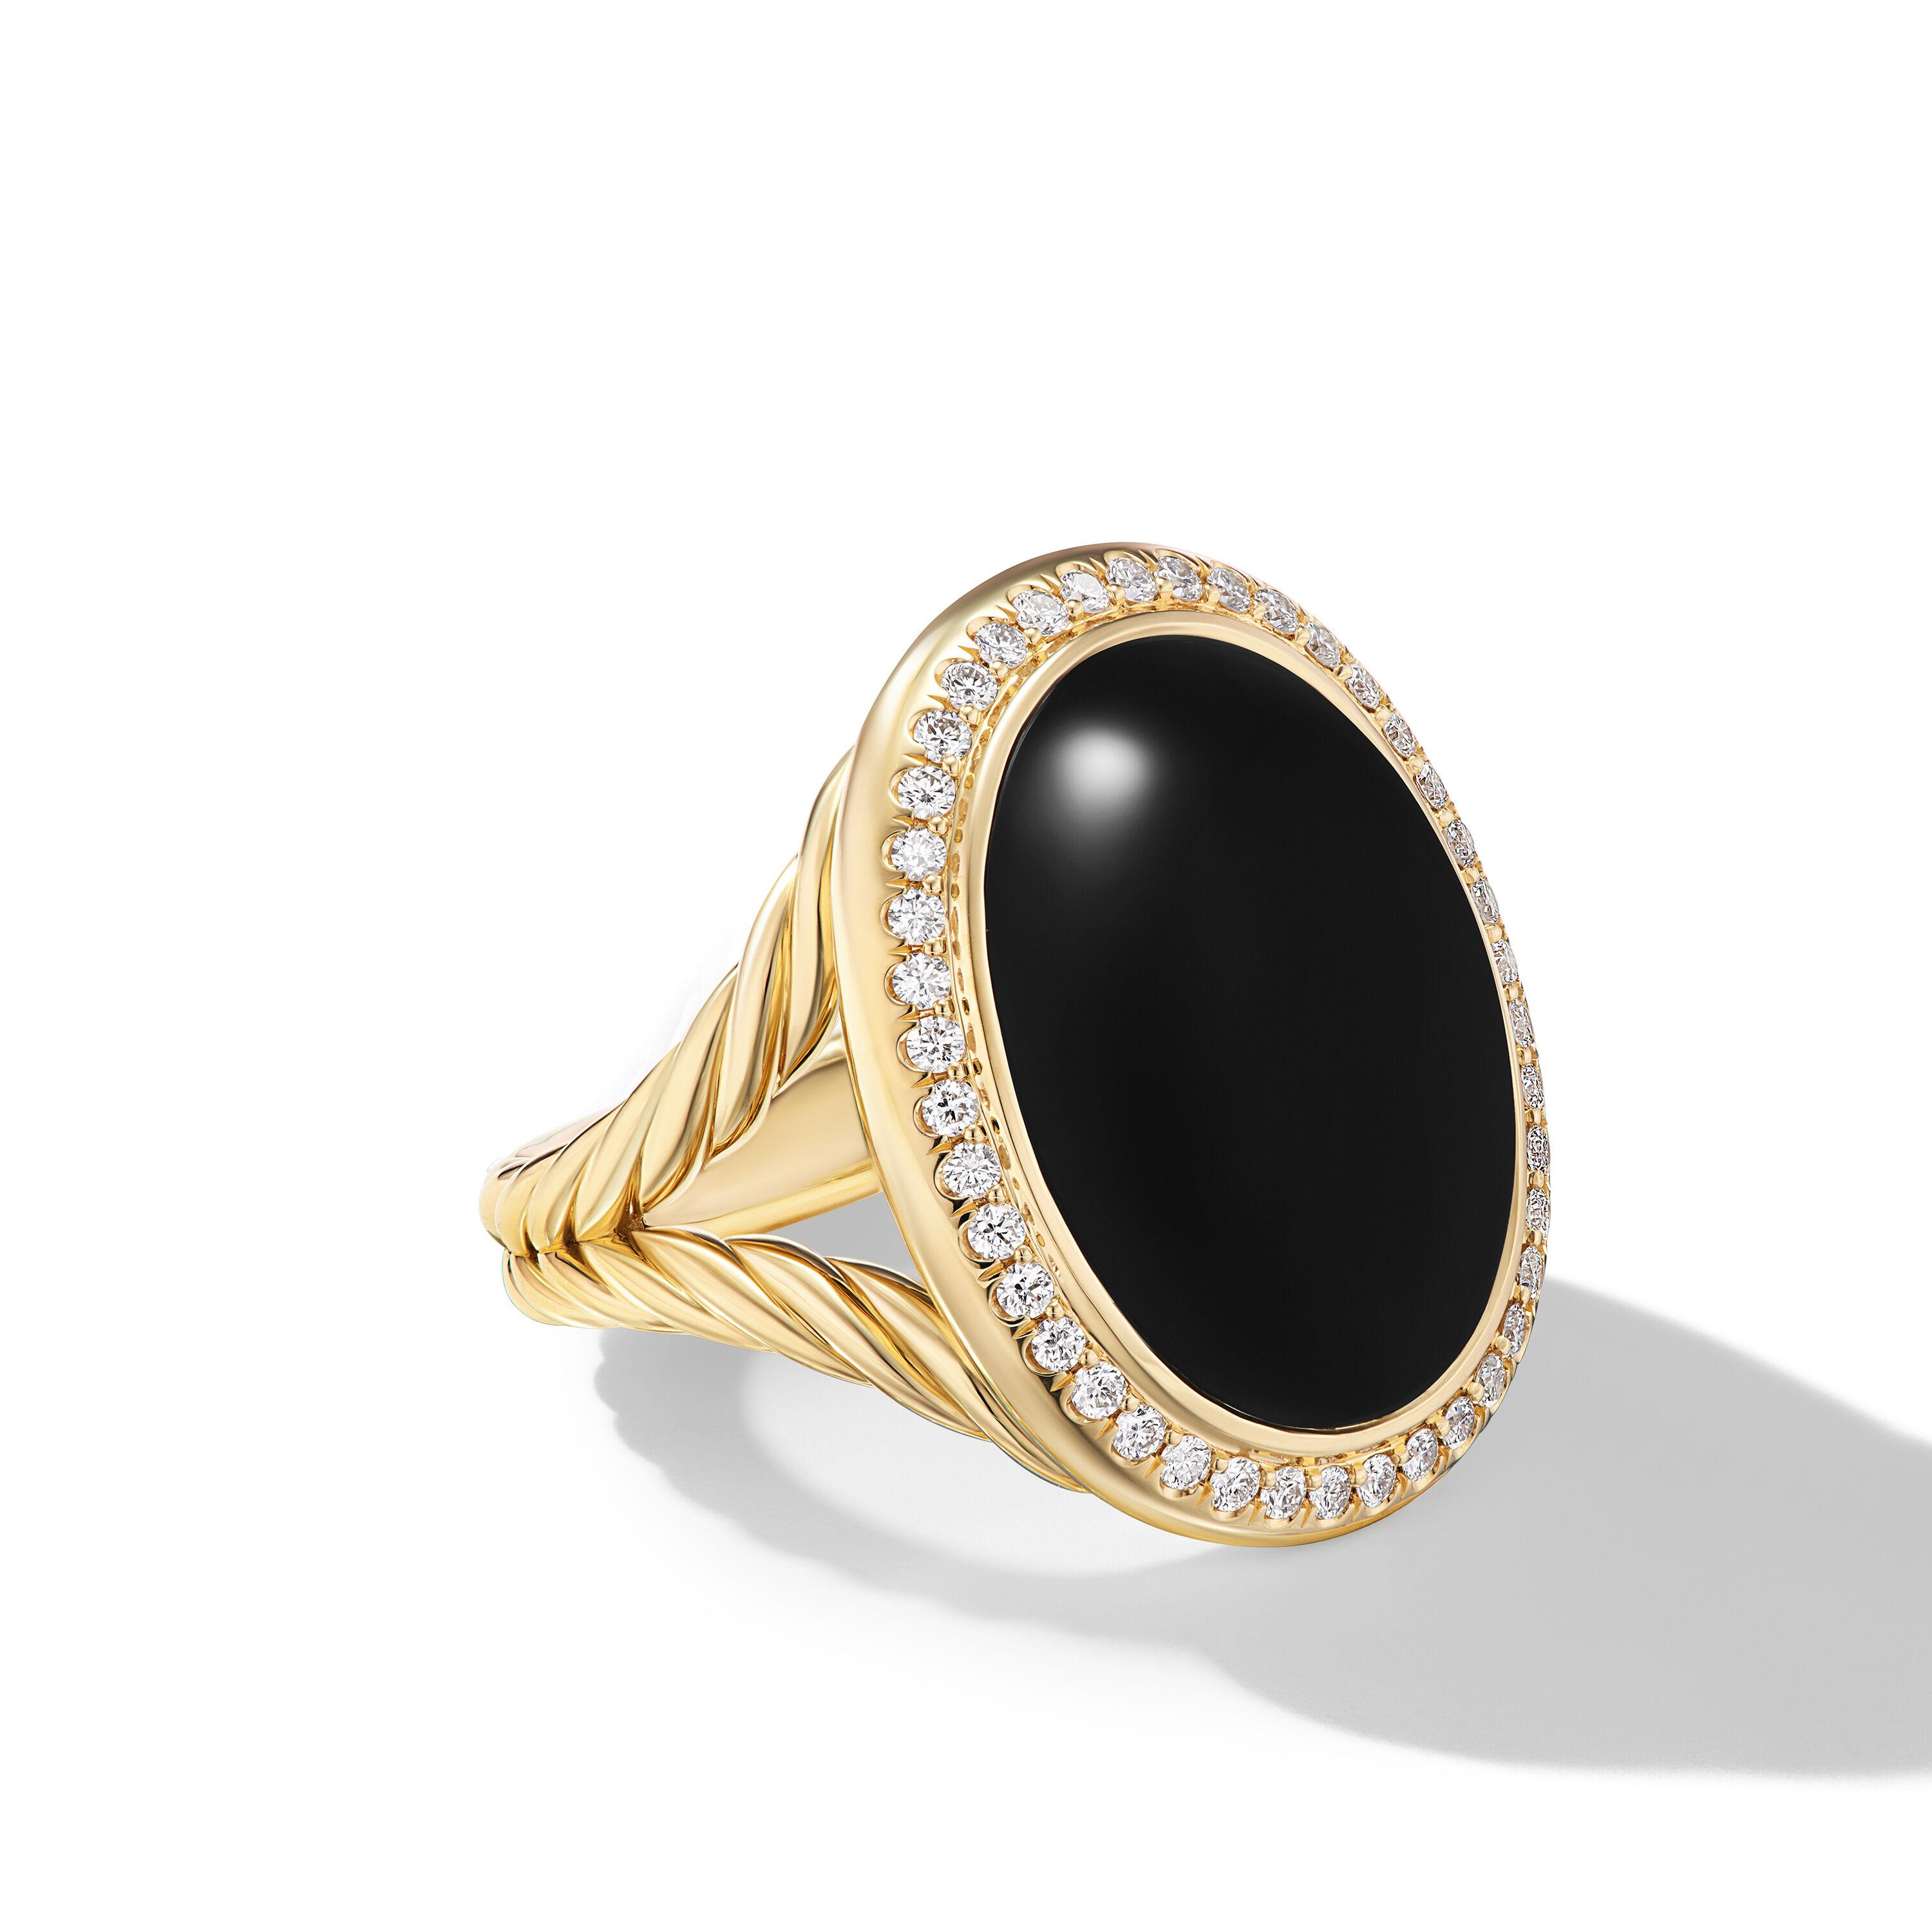 David Yurman Albion Oval Ring in 18K Yellow Gold with Black Onyx and Diamonds